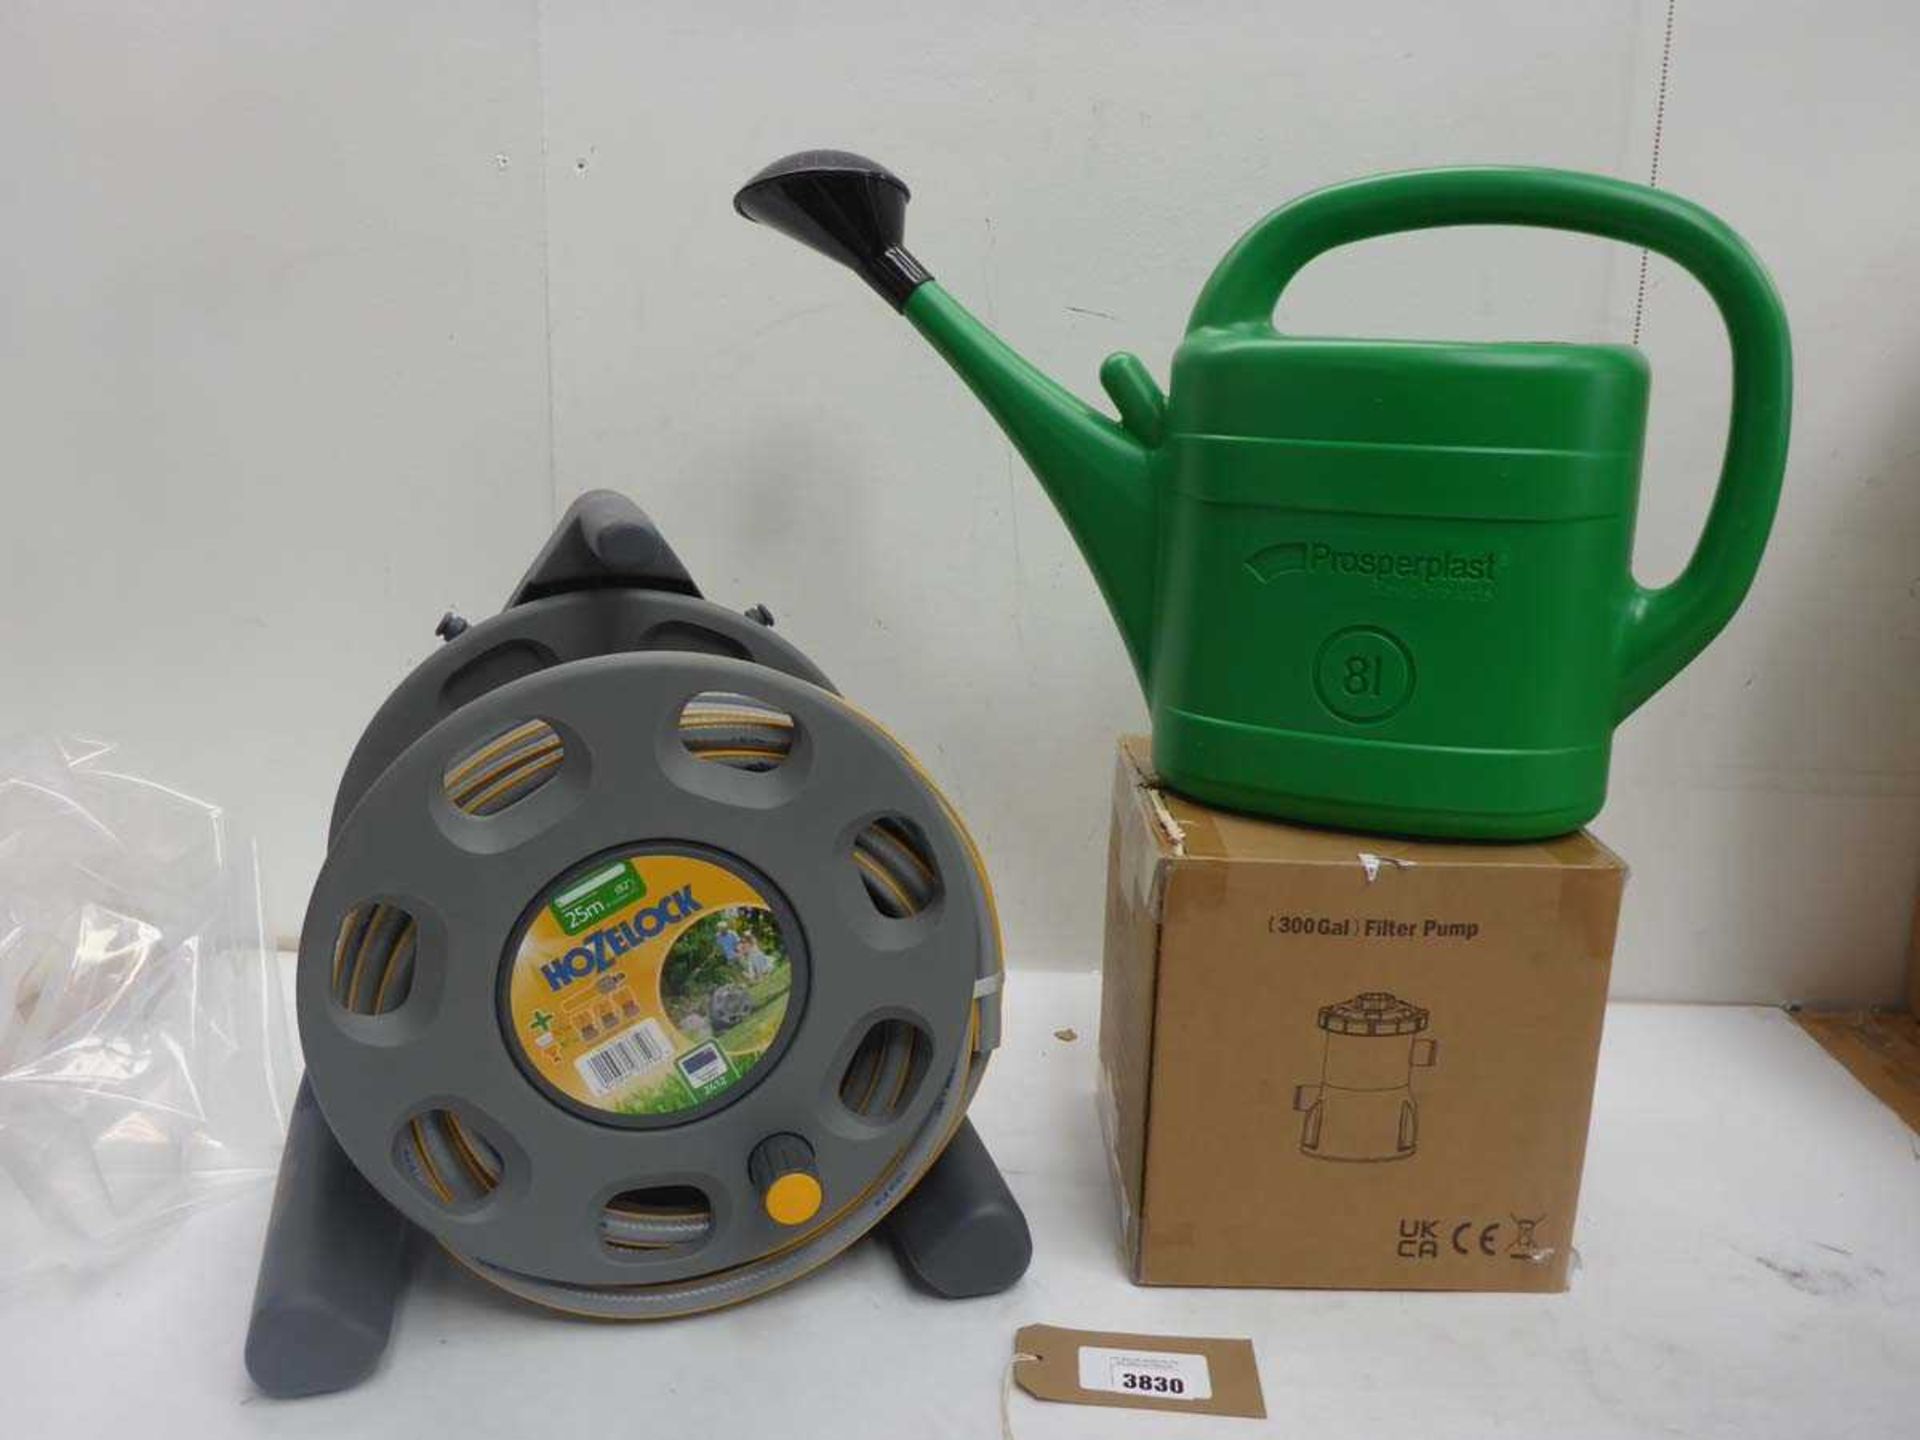 +VAT 25m Hozelock hosepipe and reel, Watering can and 330gal filter pump